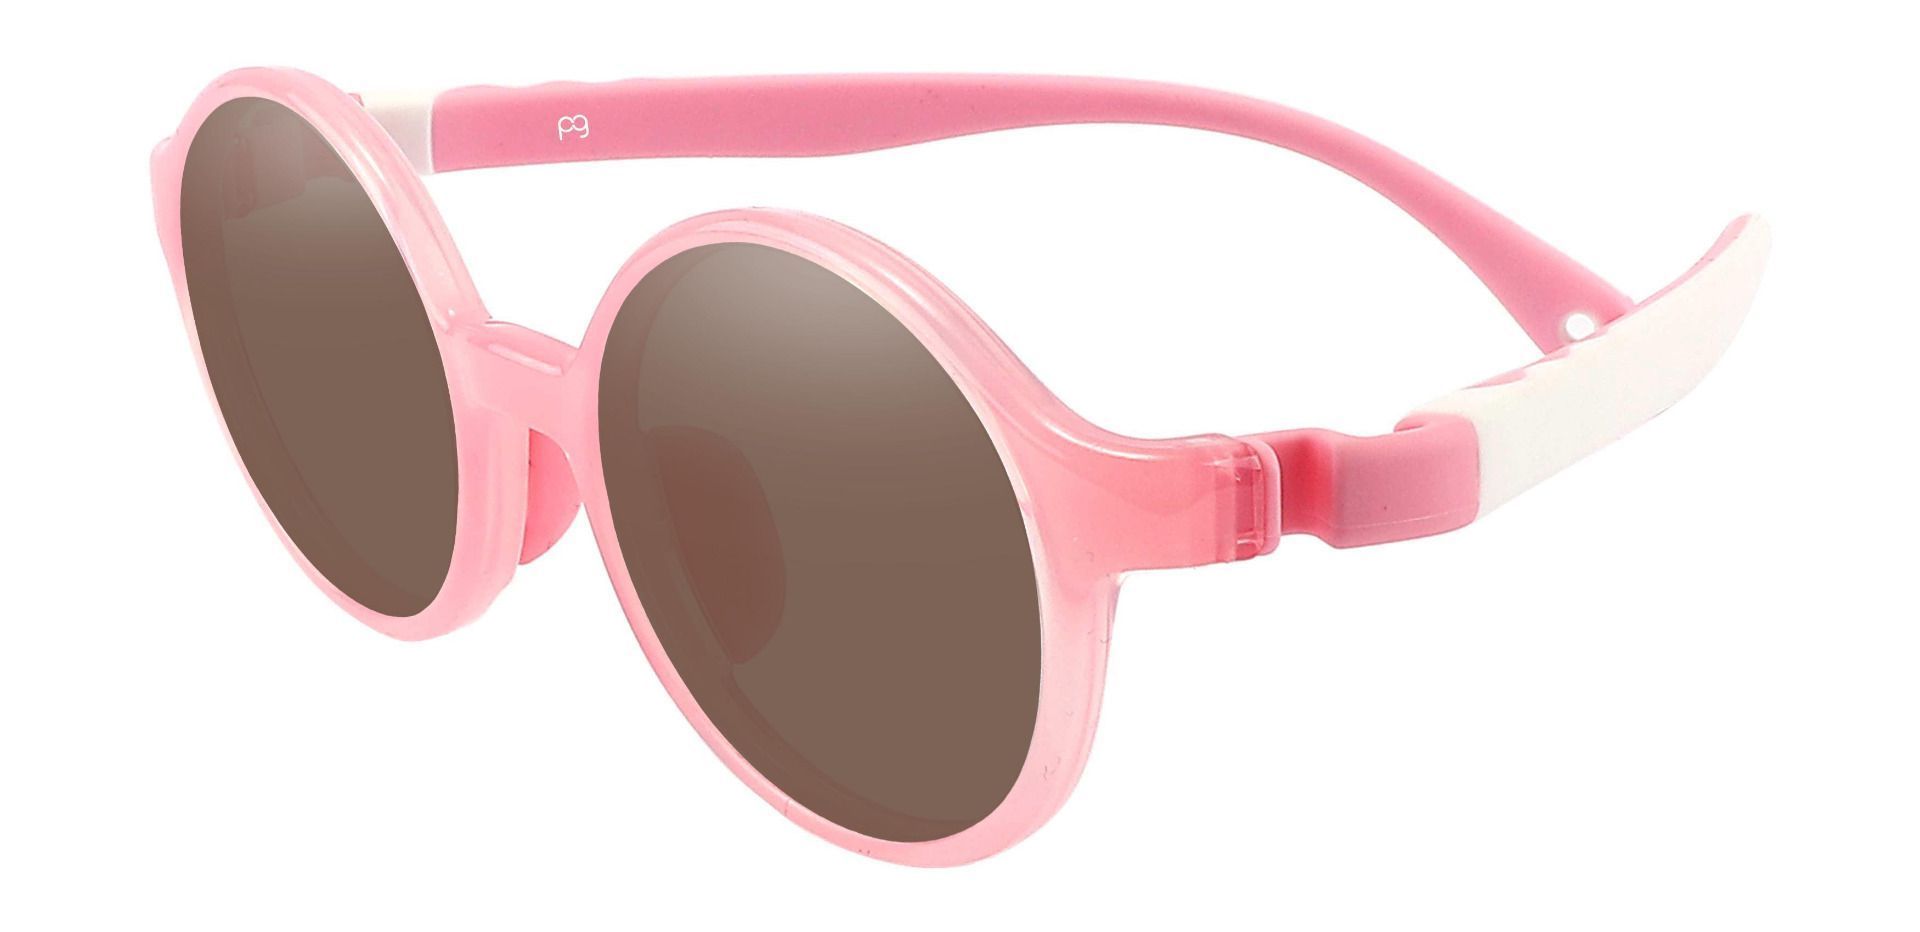 Sammy Round Reading Sunglasses - Pink Frame With Brown Lenses